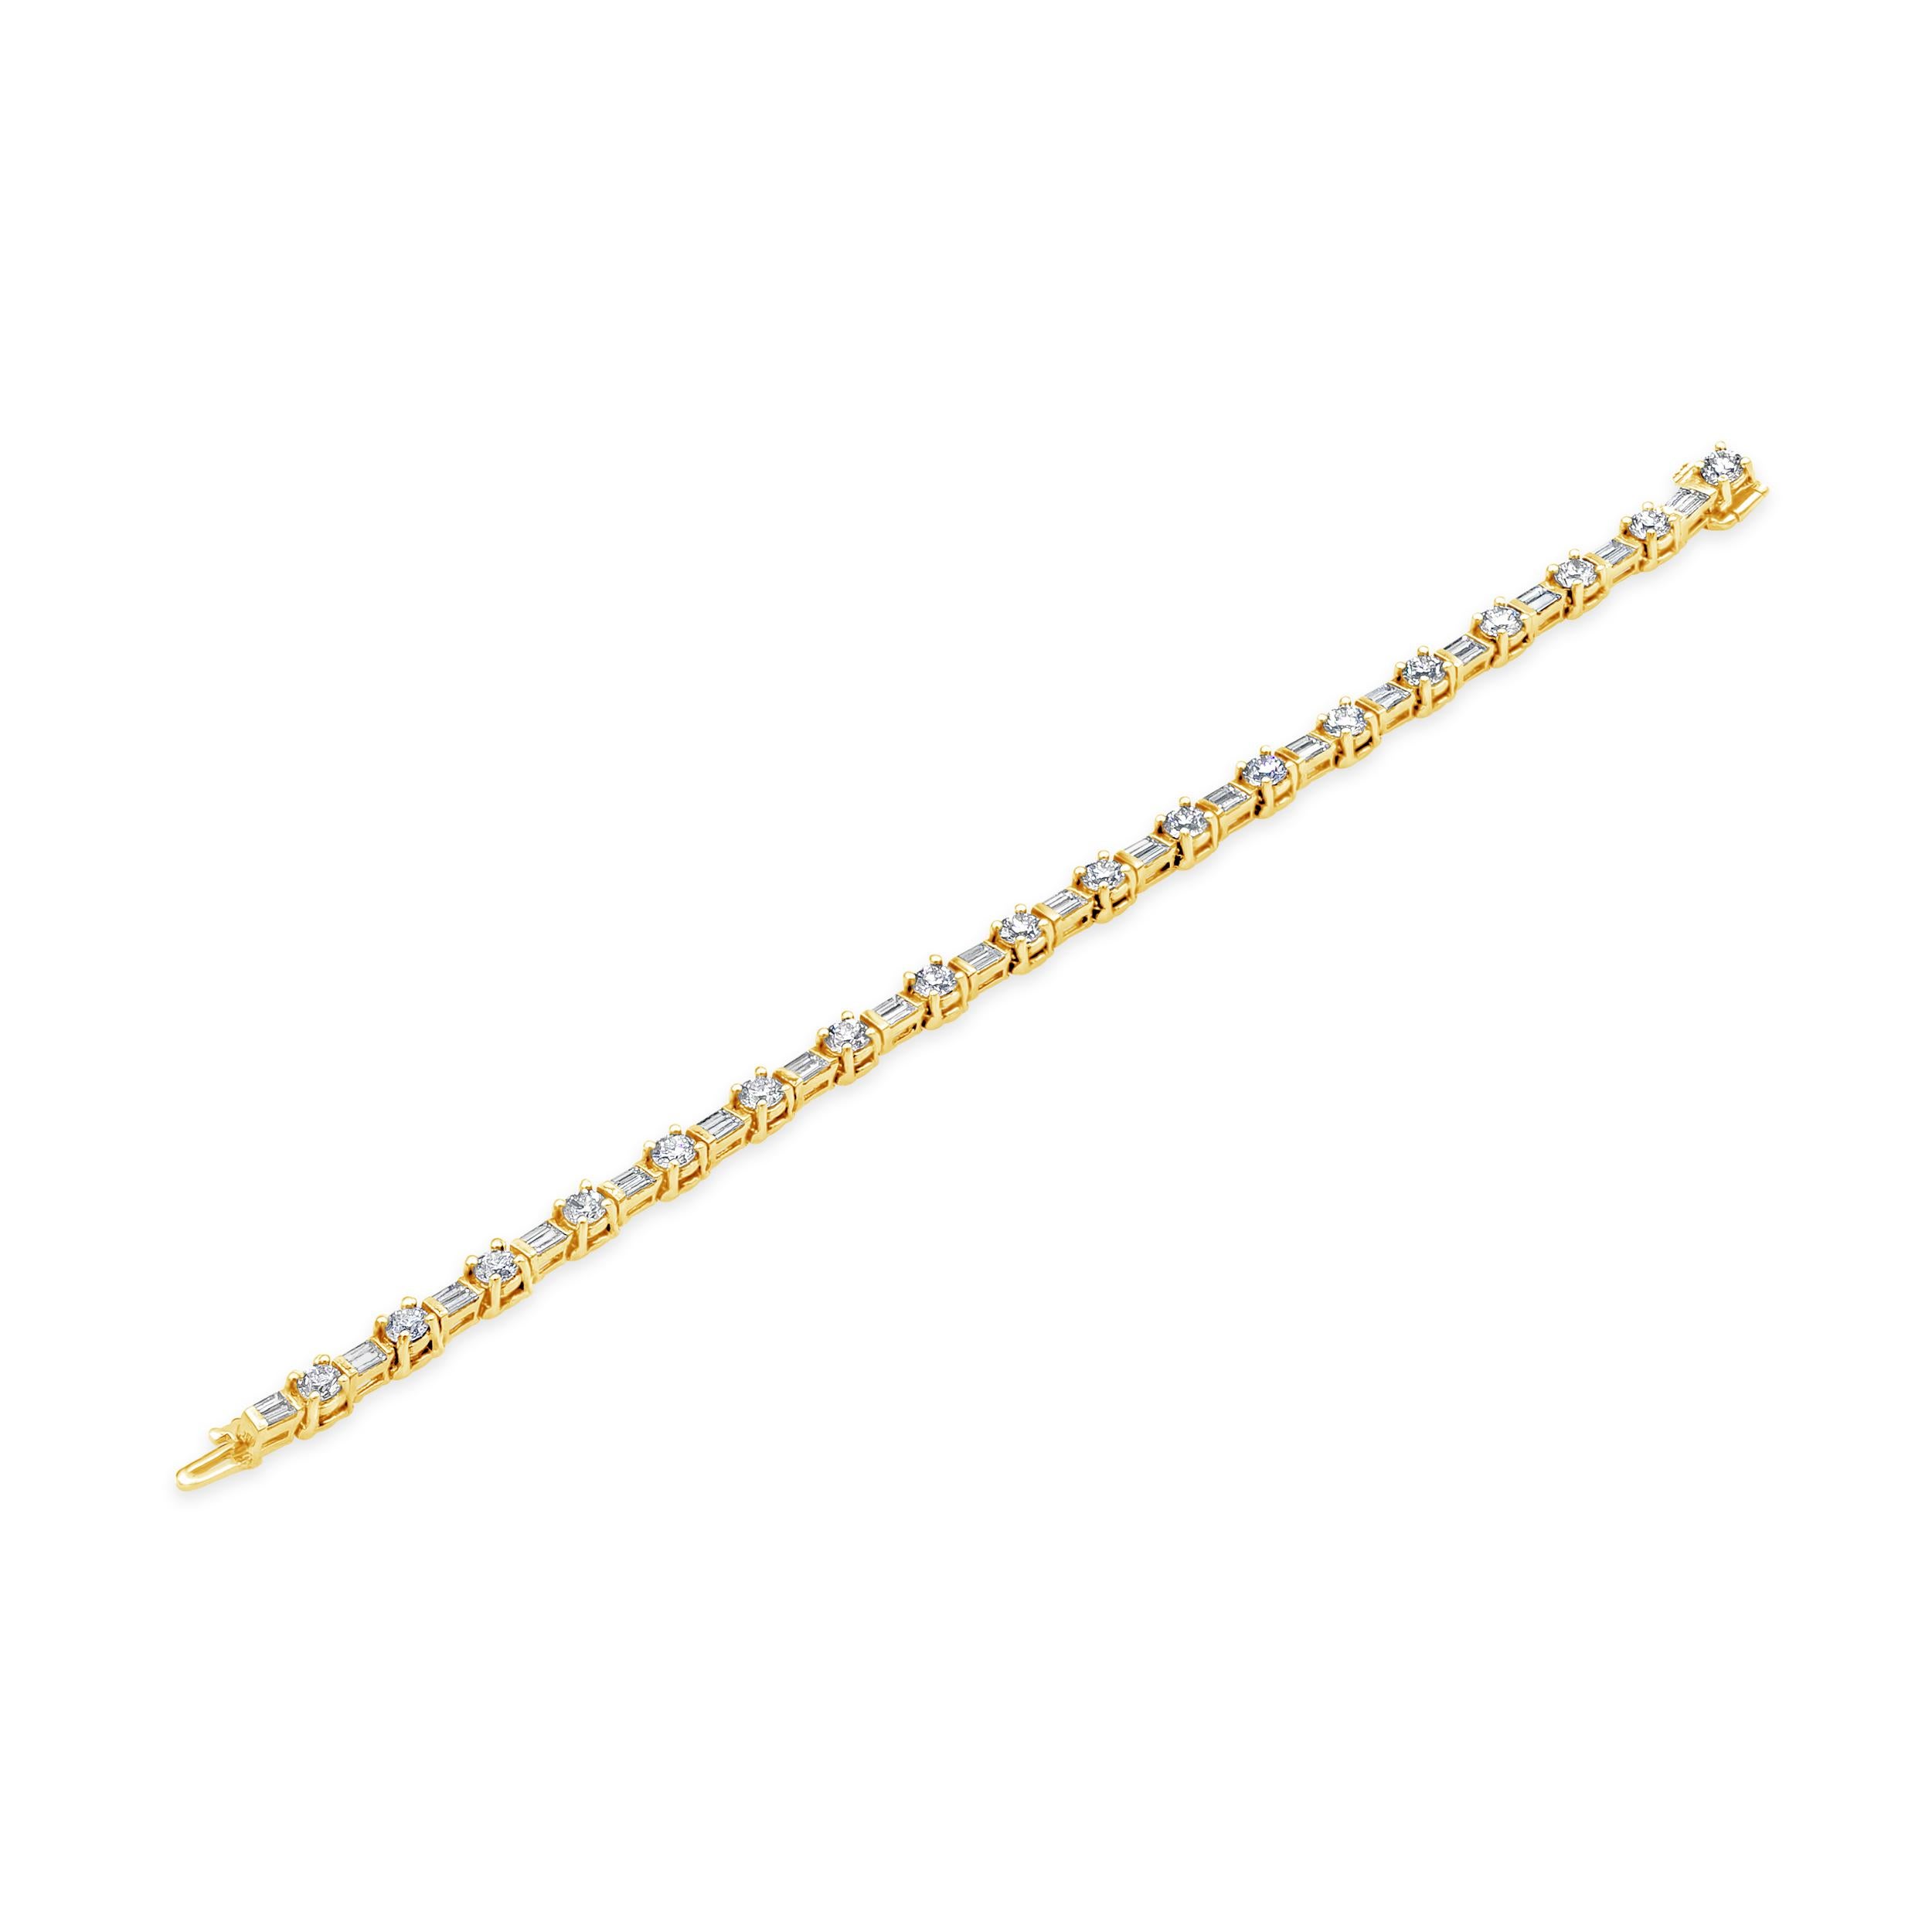 This bracelet features round diamonds of 4.90 carats and baguette diamonds of 2.60 carats. The diamonds are F in color and VS1-SI1 in clarity. The two diamond cuts alternate elegantly with each other, separated only by a bar set. Made in 18K yellow